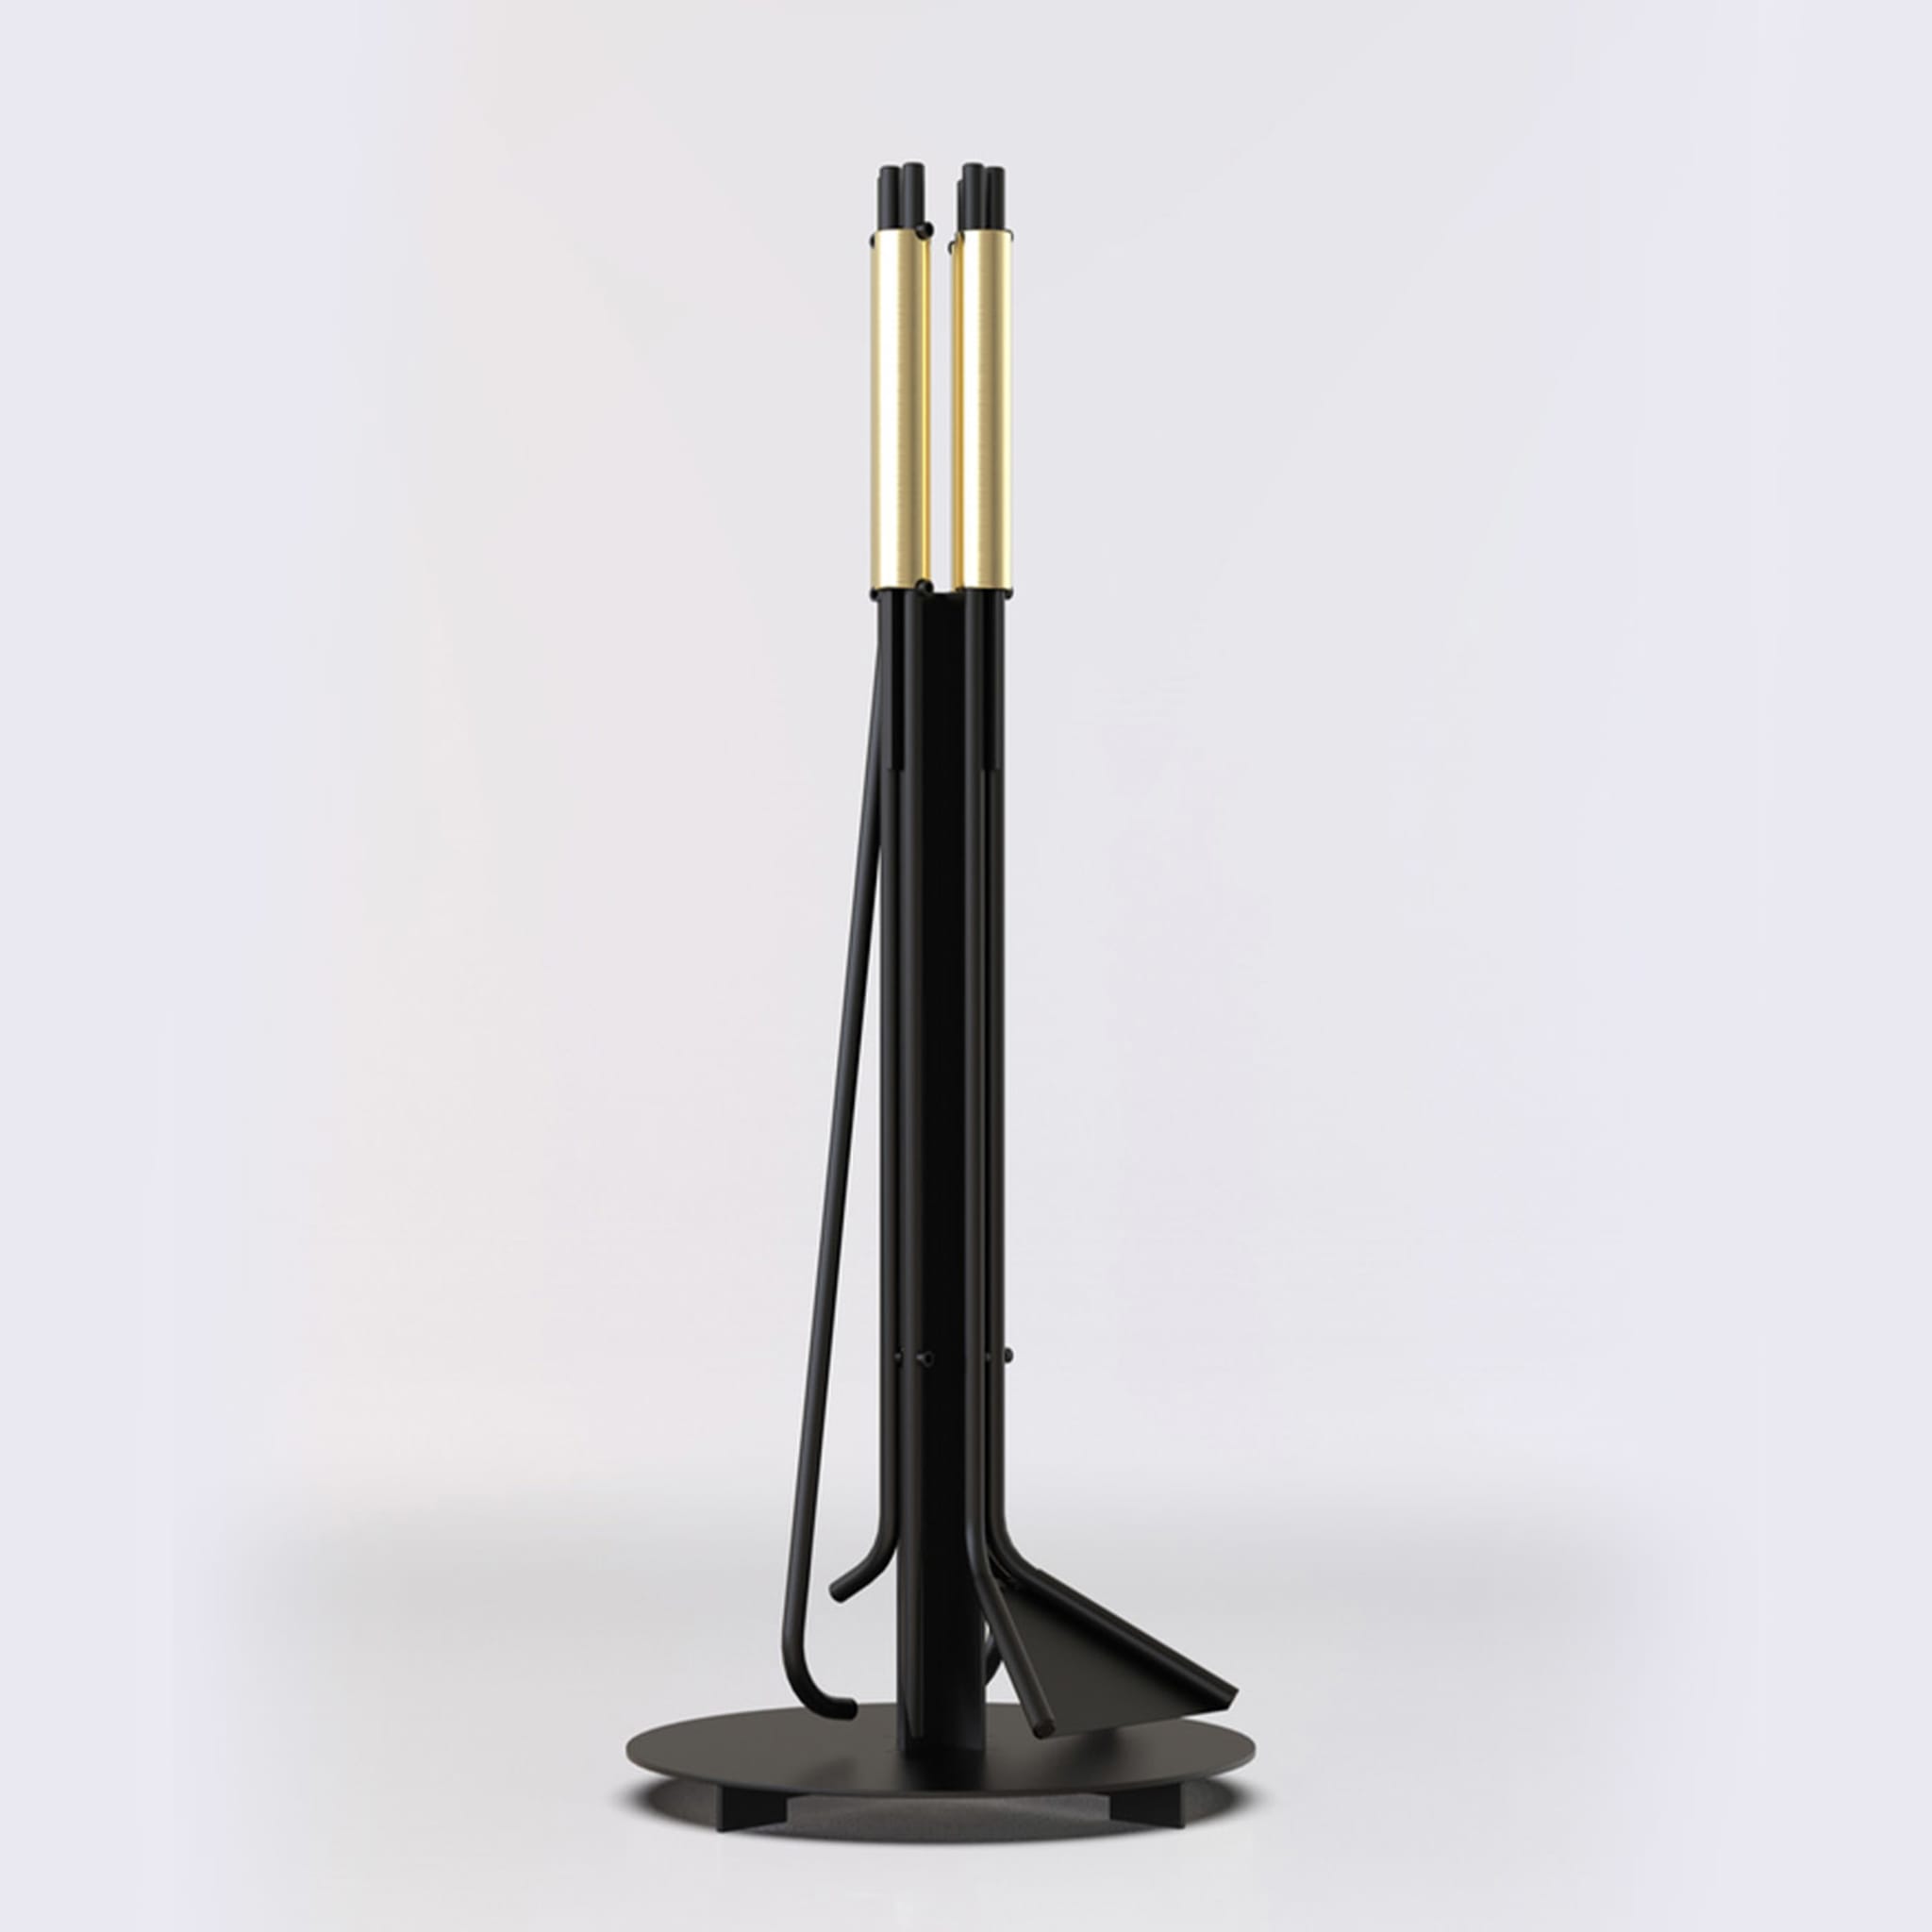 ED001 Black and Brass Fireplace Tools - Alternative view 5